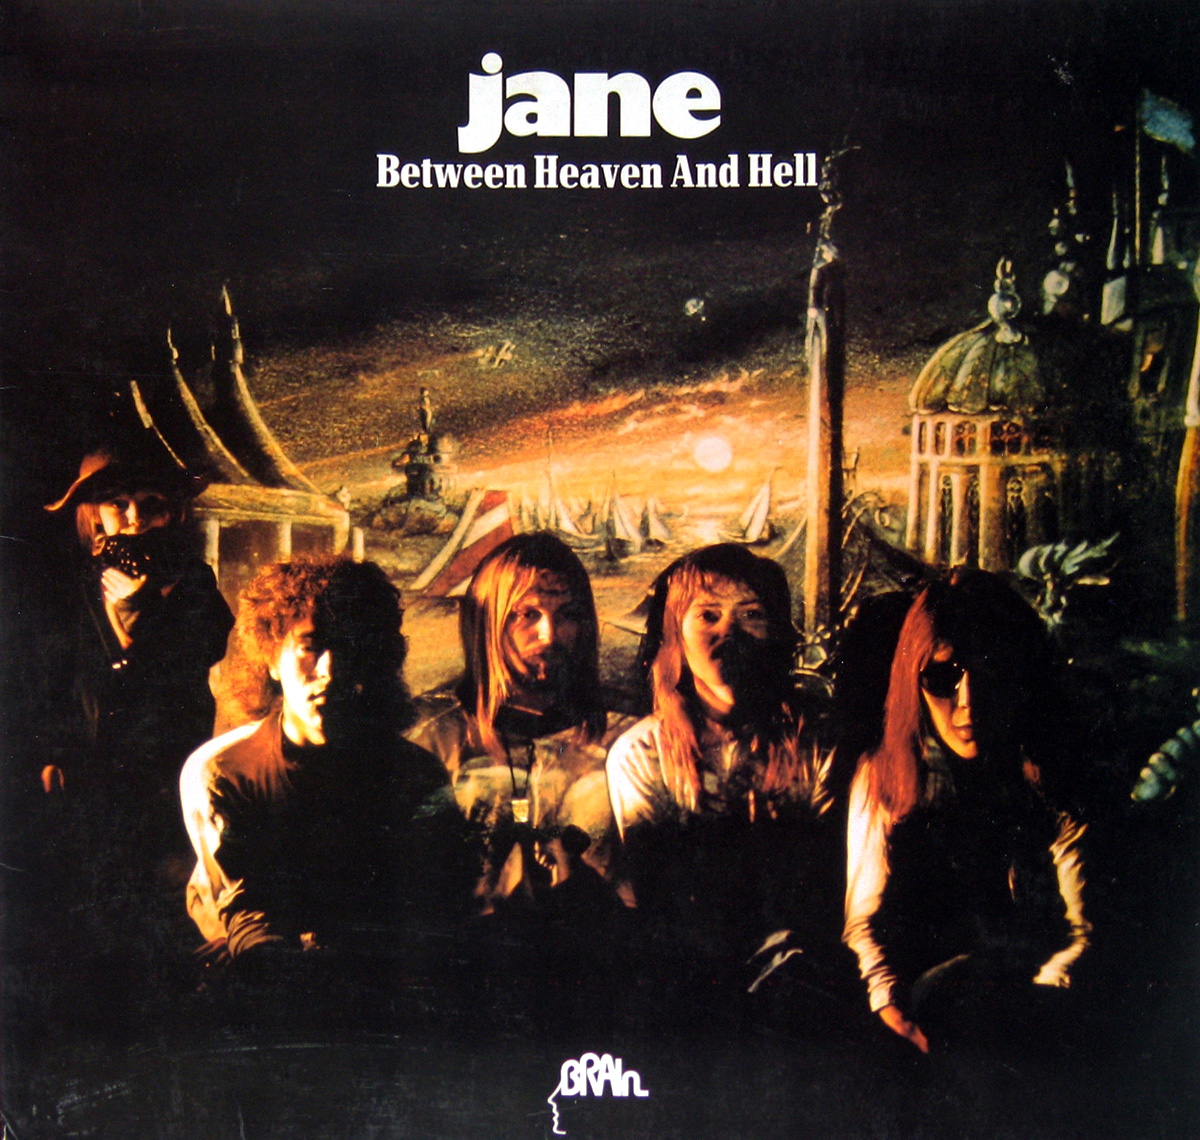 The album cover for JANE's Between Heaven and Hell is a psychedelic masterpiece. It features a surreal landscape with floating islands, strange creatures, and fiery skies. The band members are depicted as gods or angels, standing on top of one of the islands.